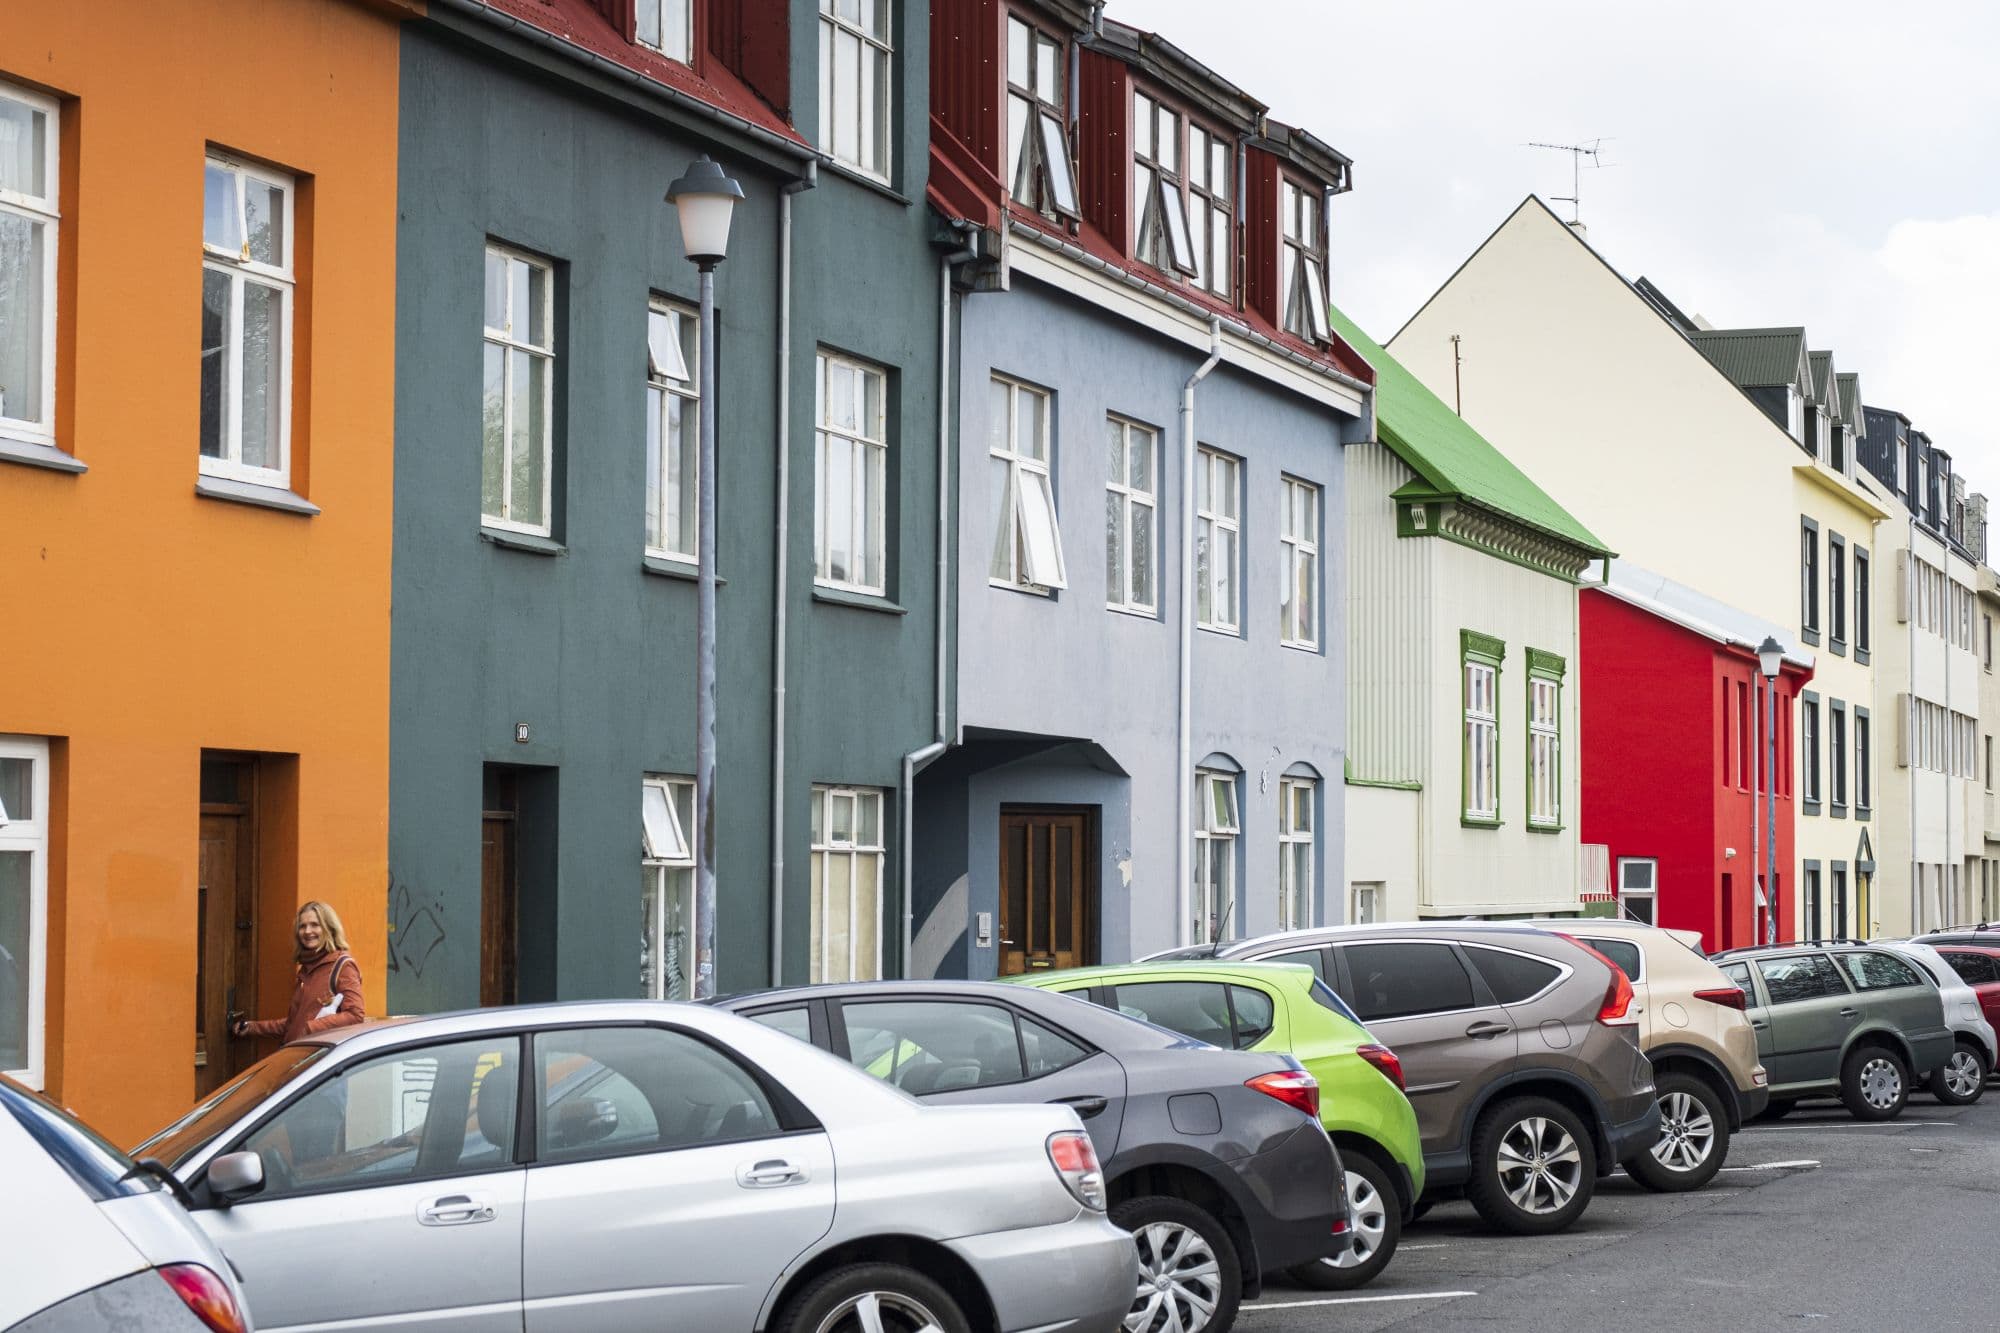 Real Estate Value Rises 11.7% in Iceland